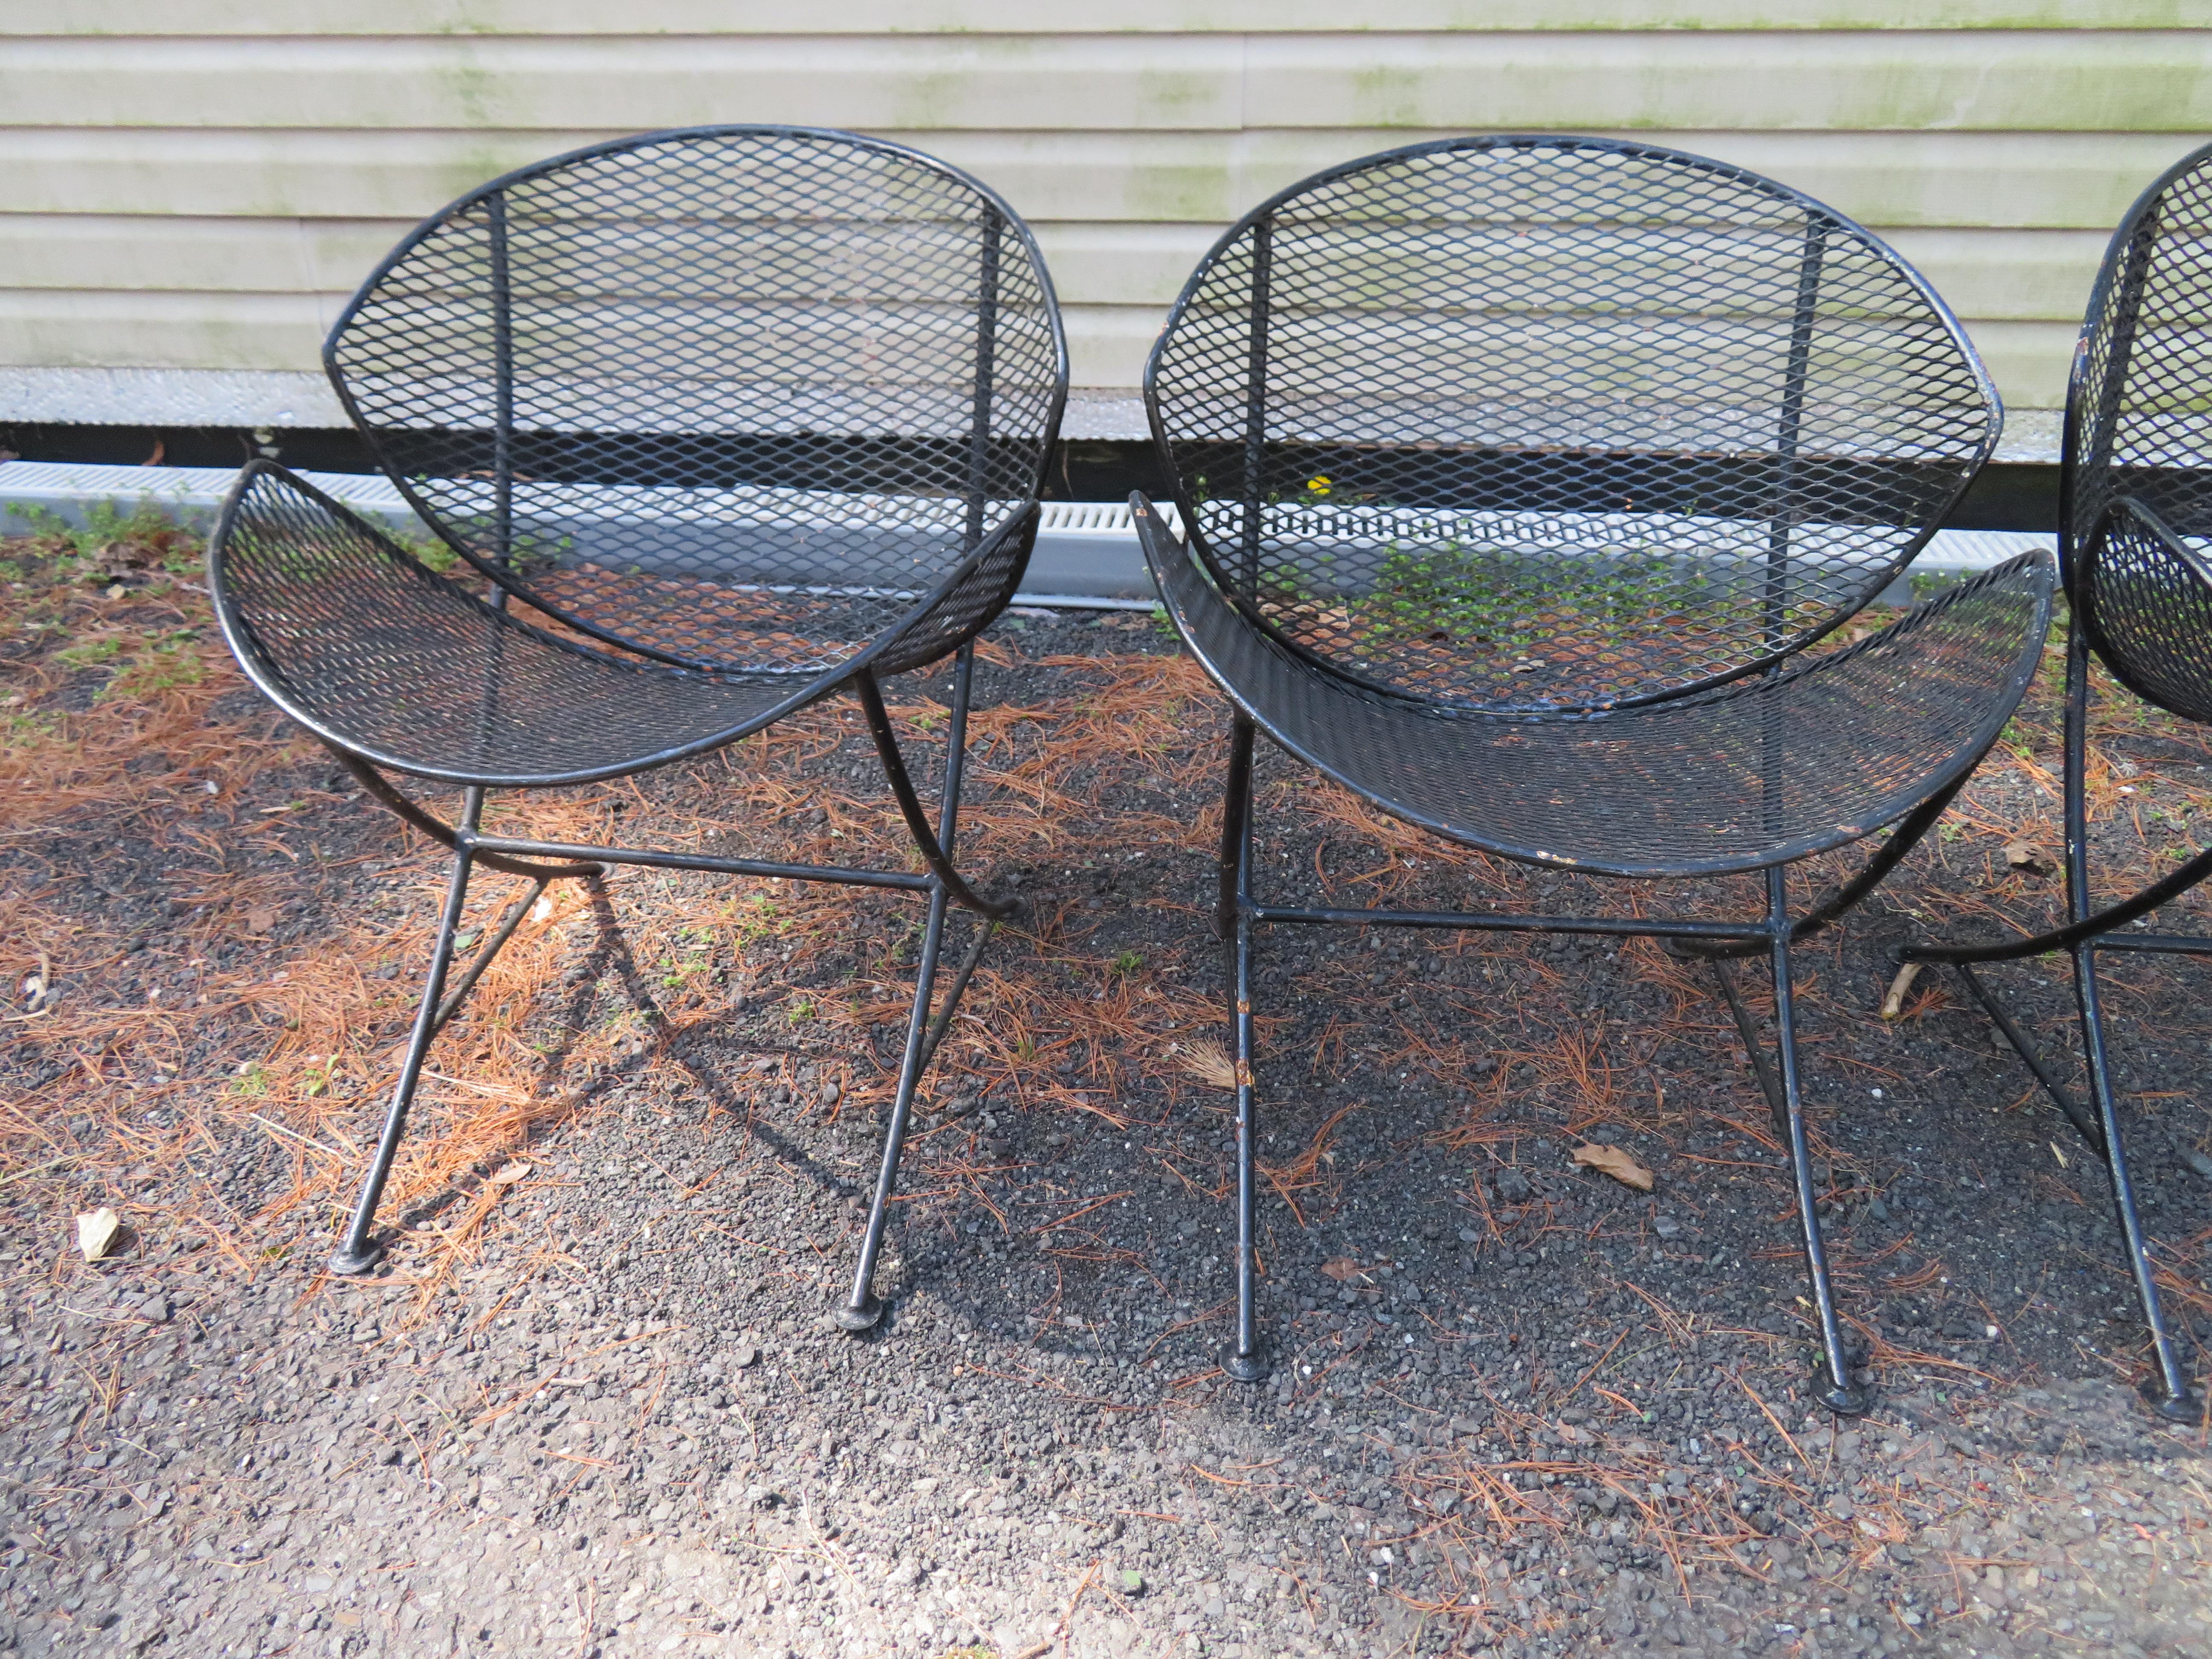 Fantastic set of 4 wrought iron and metal mesh lounge designed by Maurizio Tempestini and manufactured by Salterini. Wrought iron frames with metal mesh seats and backs. All chairs are in very good original condition, showing only cosmetic wear to